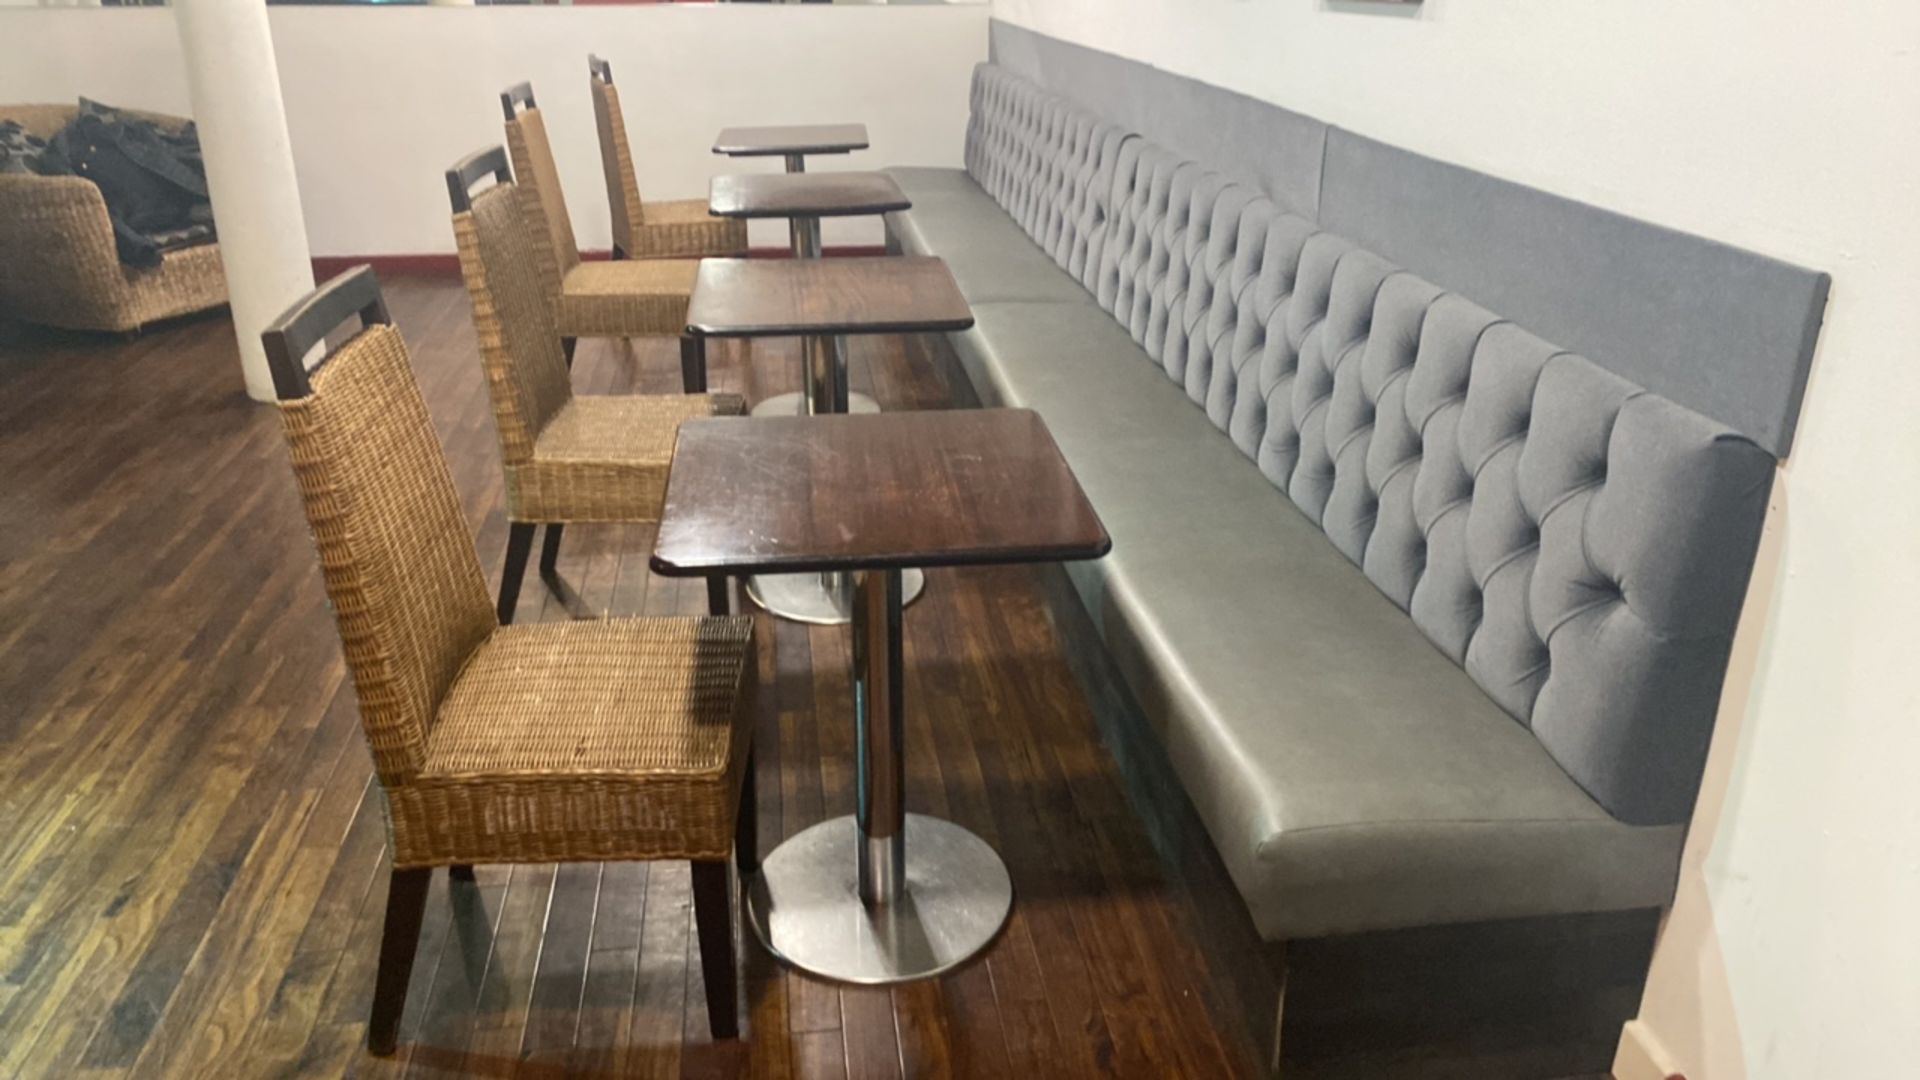 Large Grey Bankquetline Seating With Chairs And Tables - Image 2 of 5